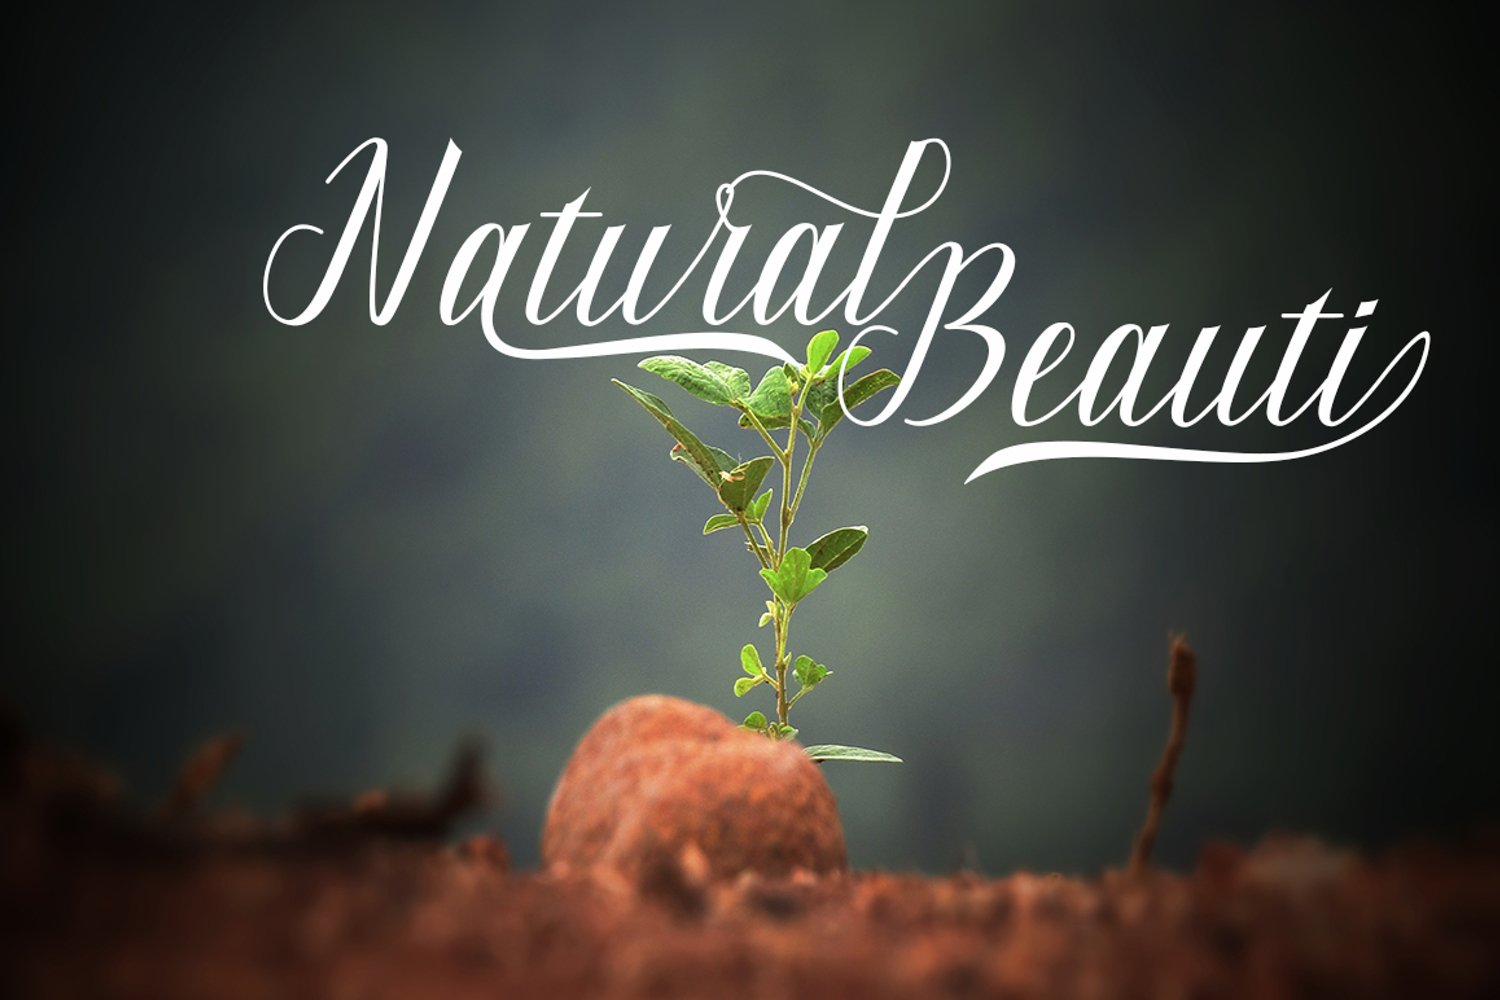 Describe the natural beauty using this font.